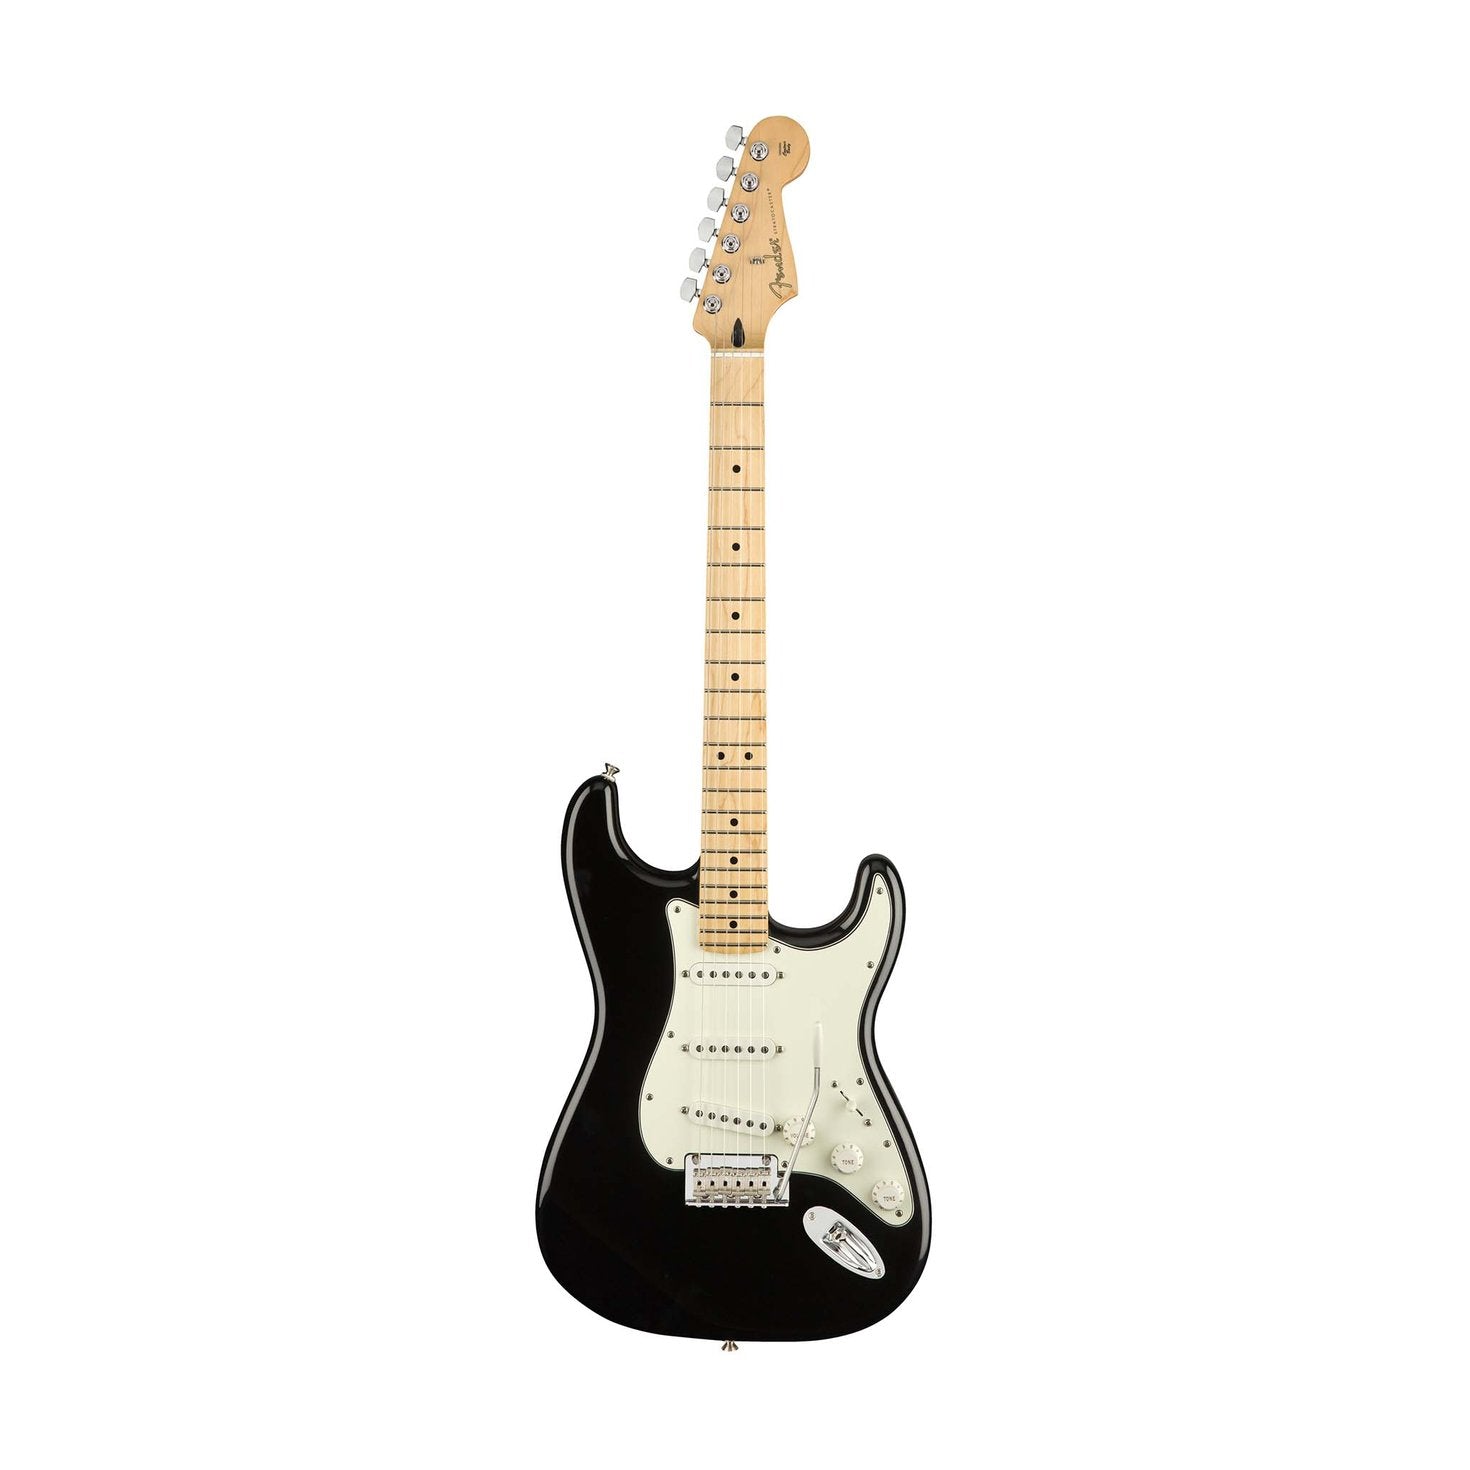 Fender Player Stratocaster Electric Guitar, Maple FB, Black, FENDER, ELECTRIC GUITAR, fender-eletric-guitar-f03-014-4502-506, ZOSO MUSIC SDN BHD